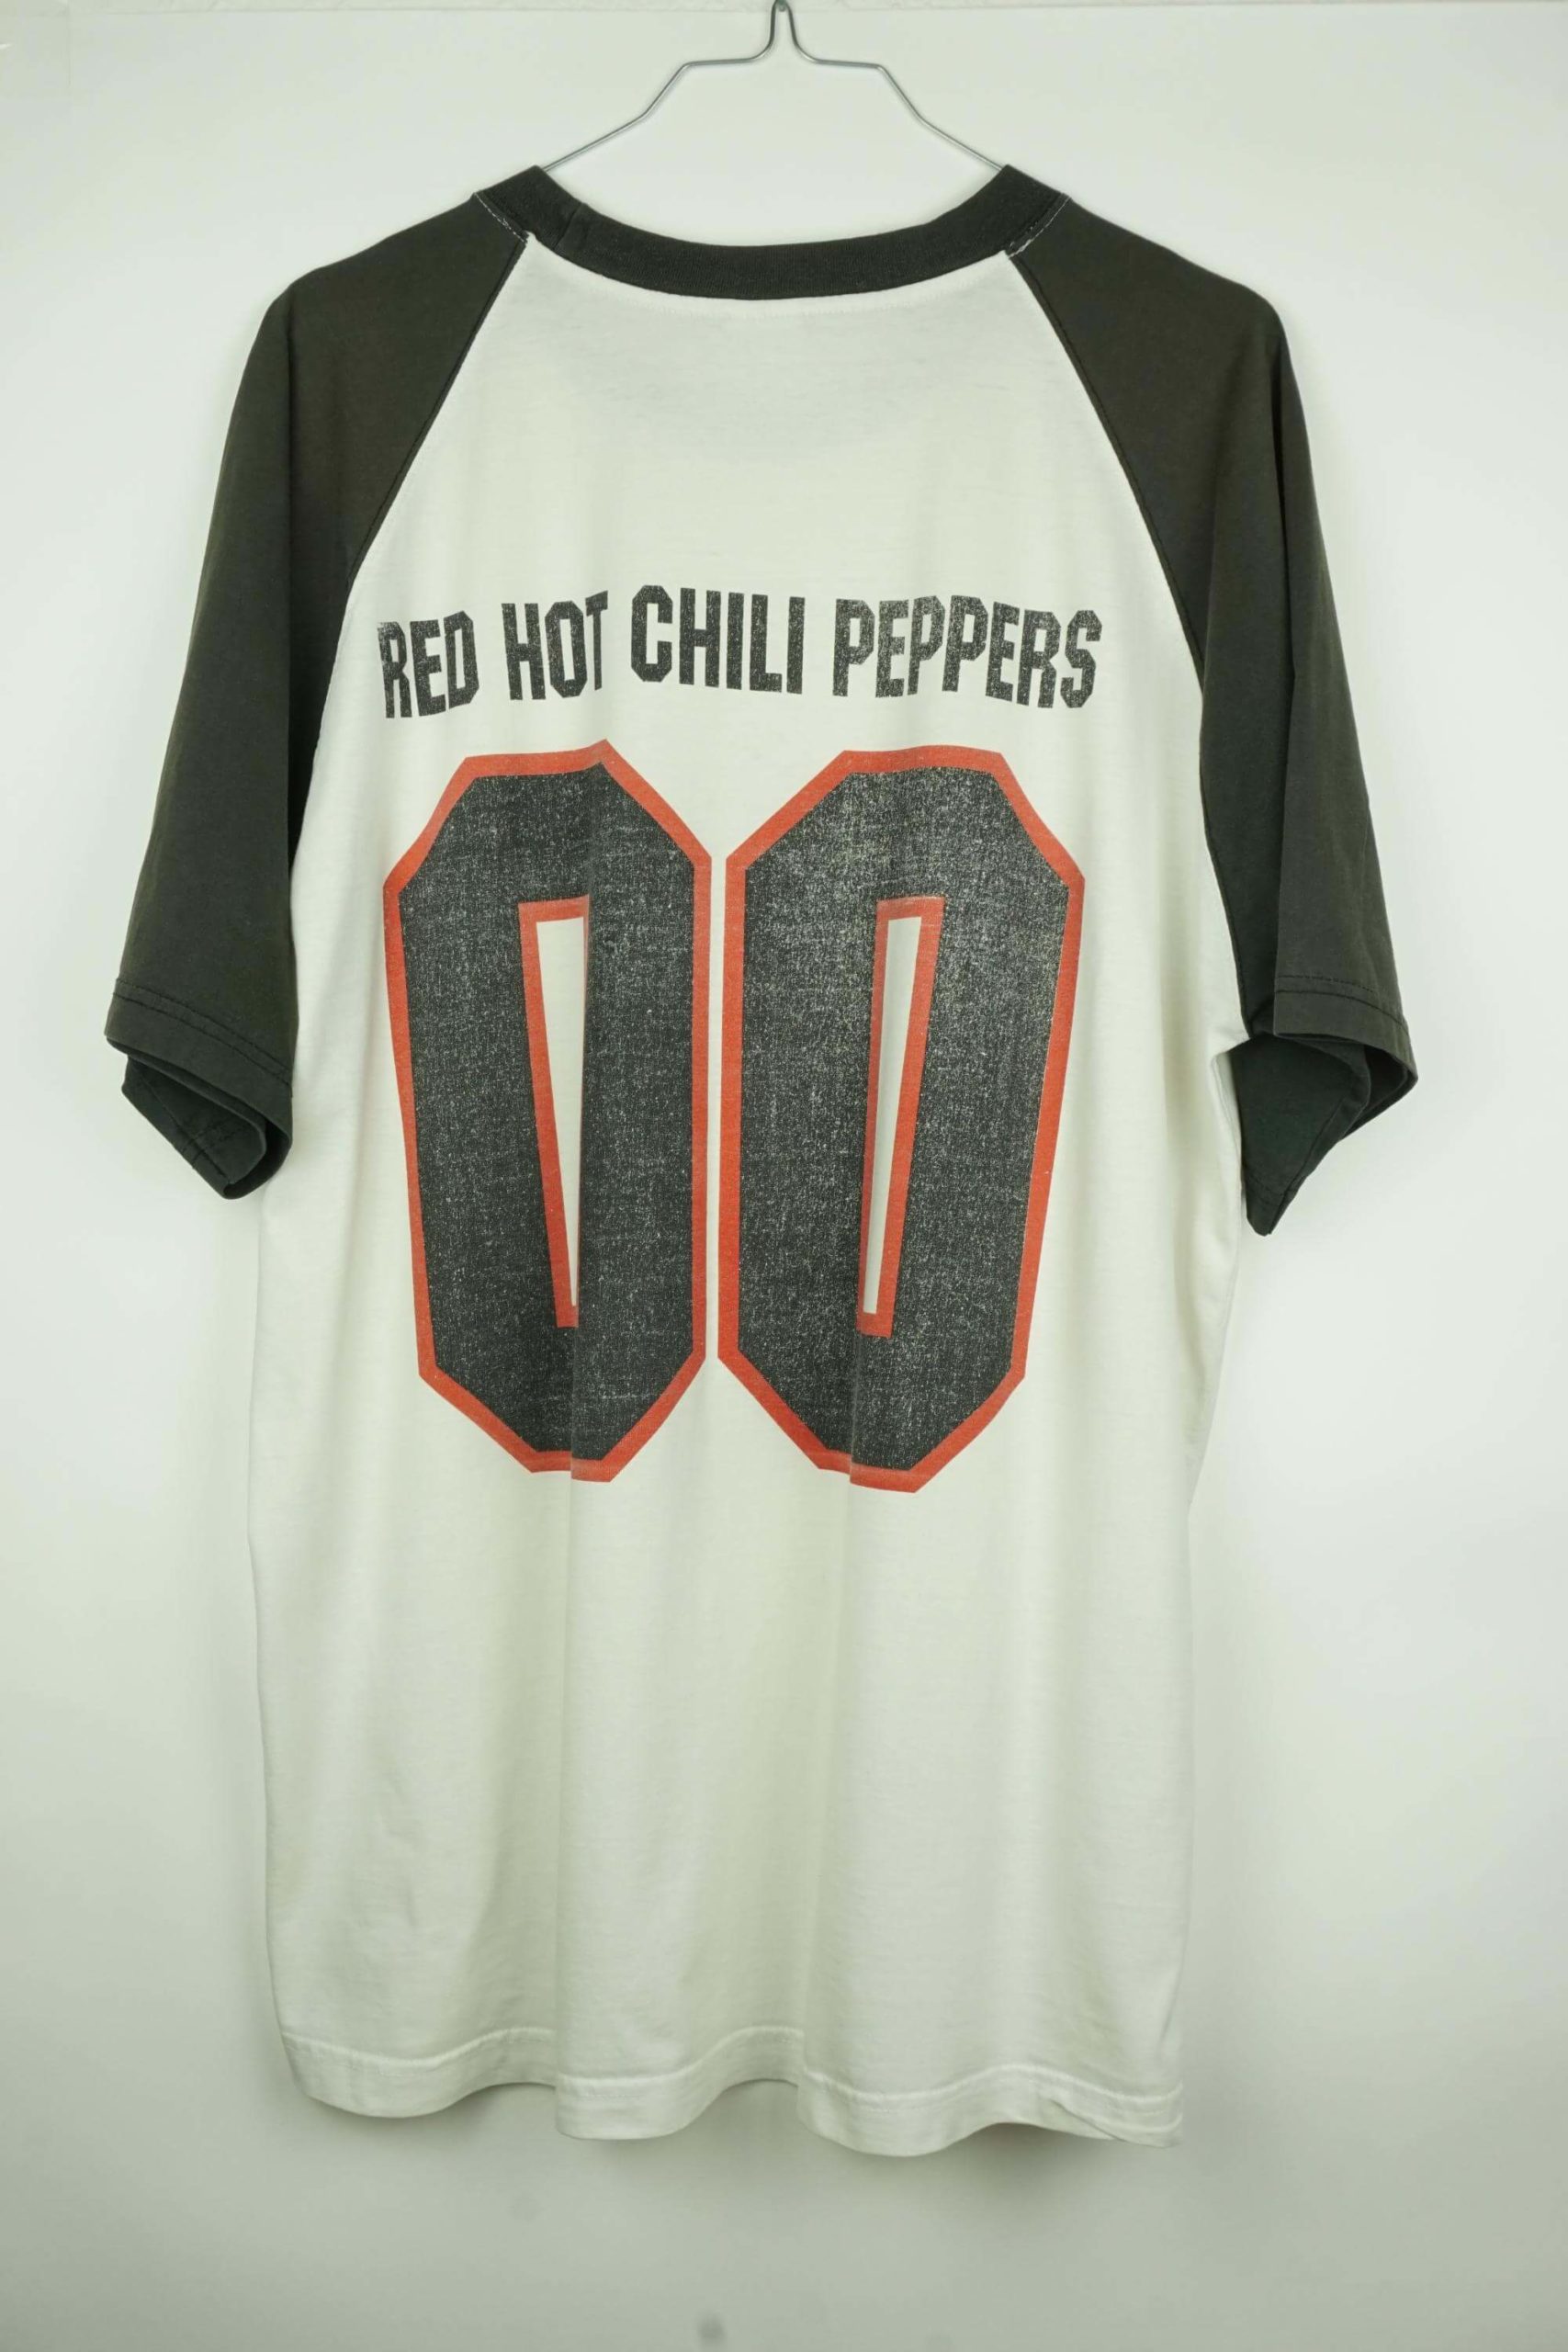 RED HOT CHILI PEPPERS   CALIFORNICATION